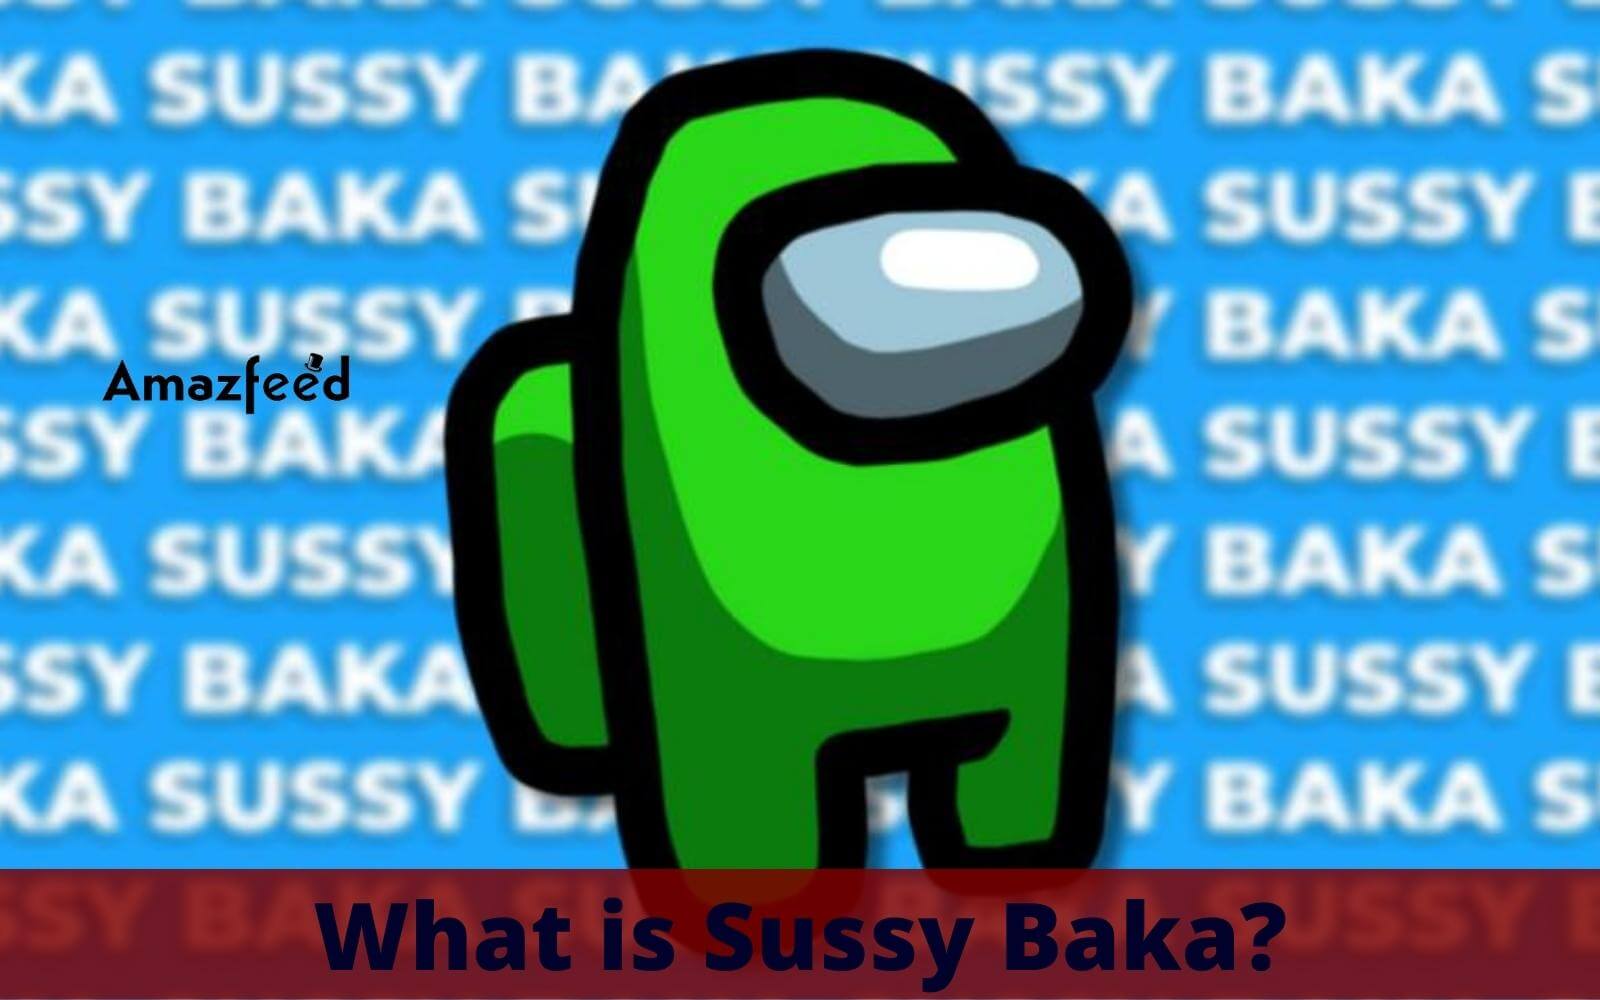 What is Sussy Baka?